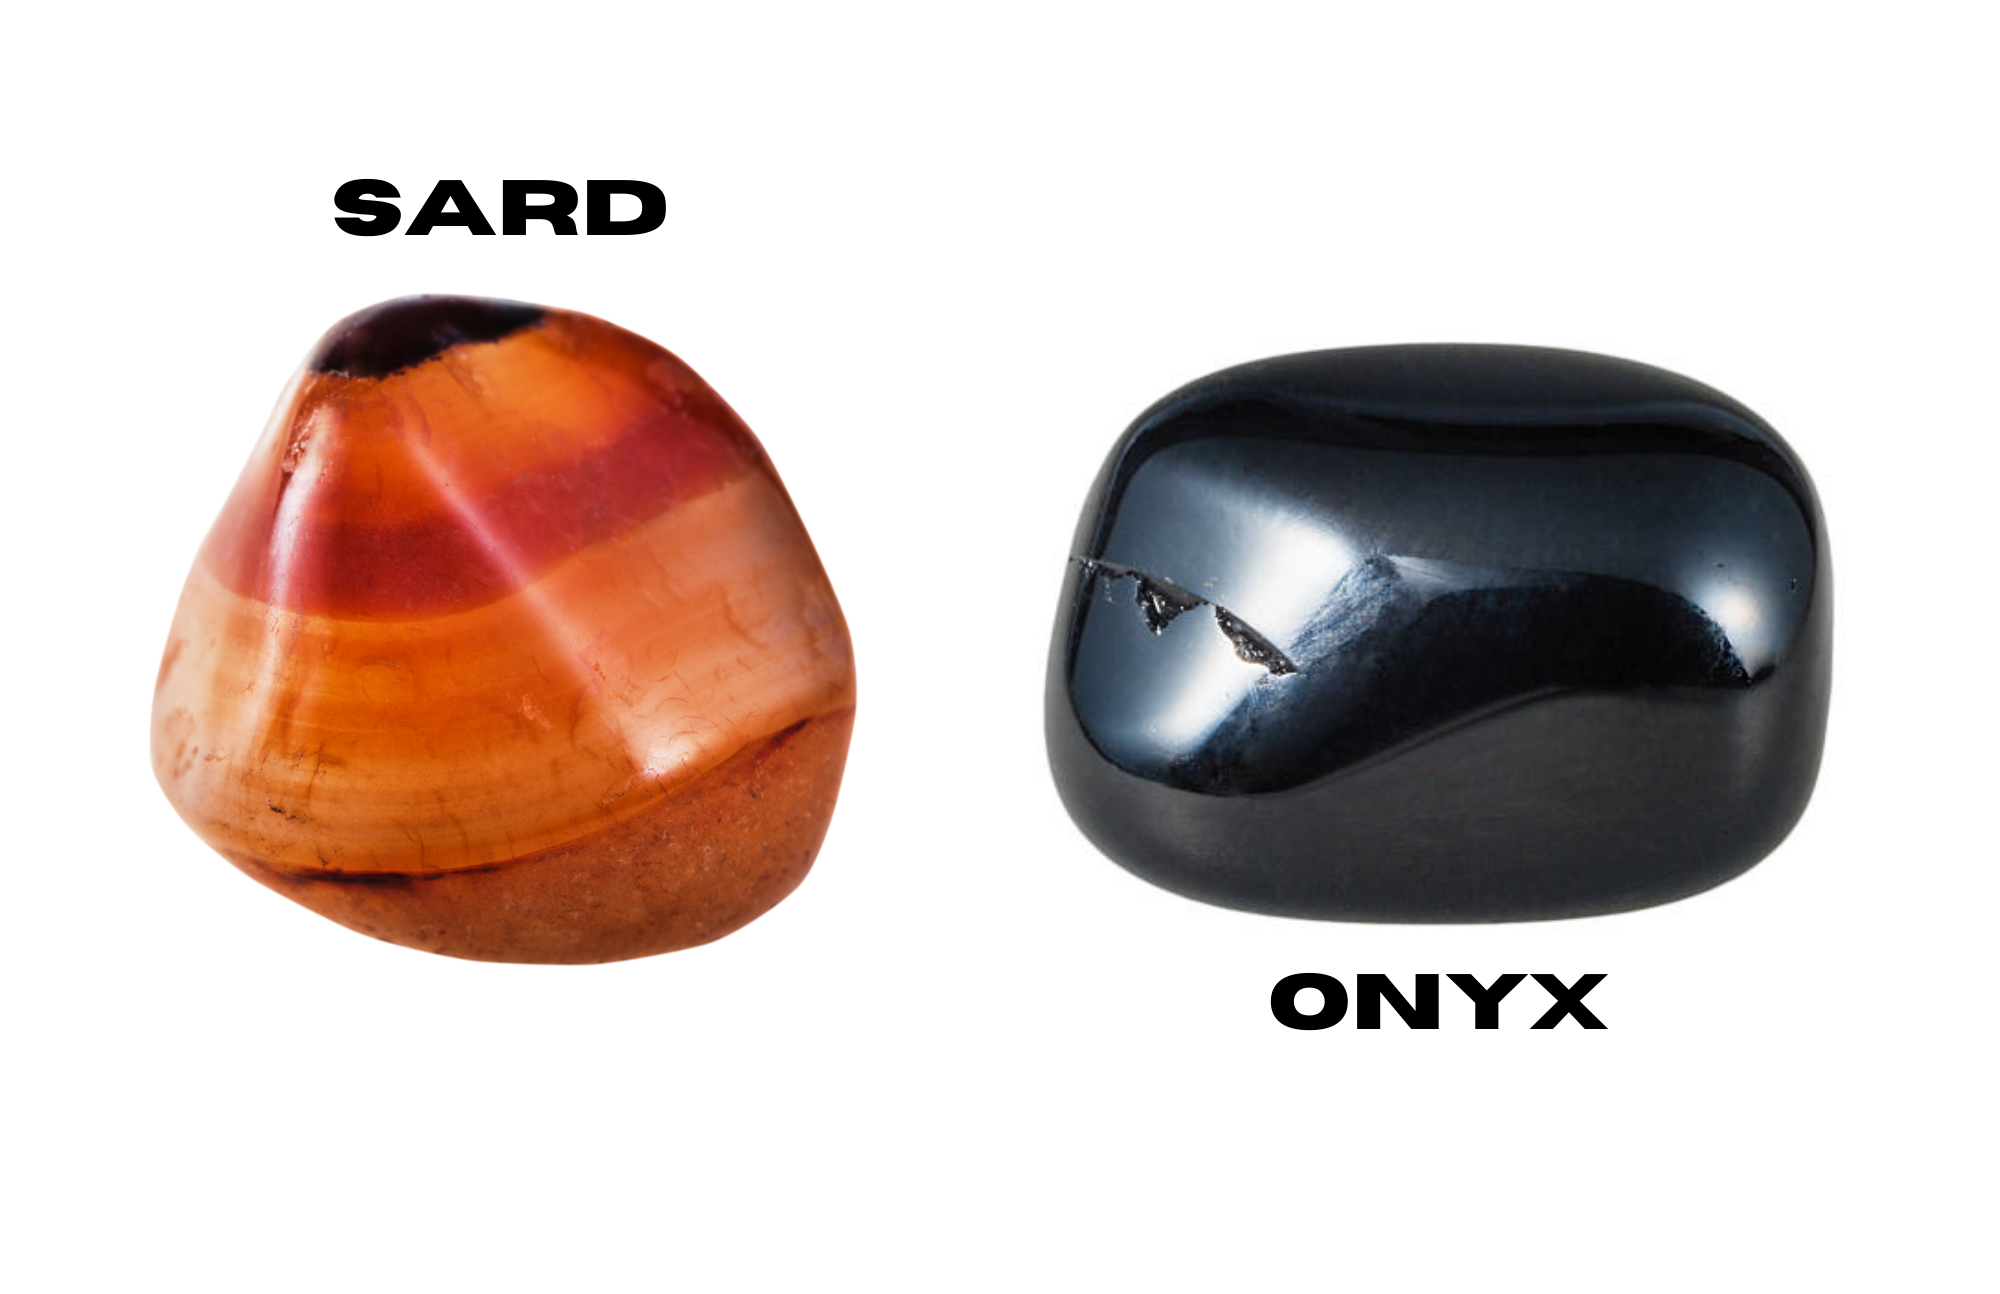 The difference between the Sard on the left side and the Onyx on the right side